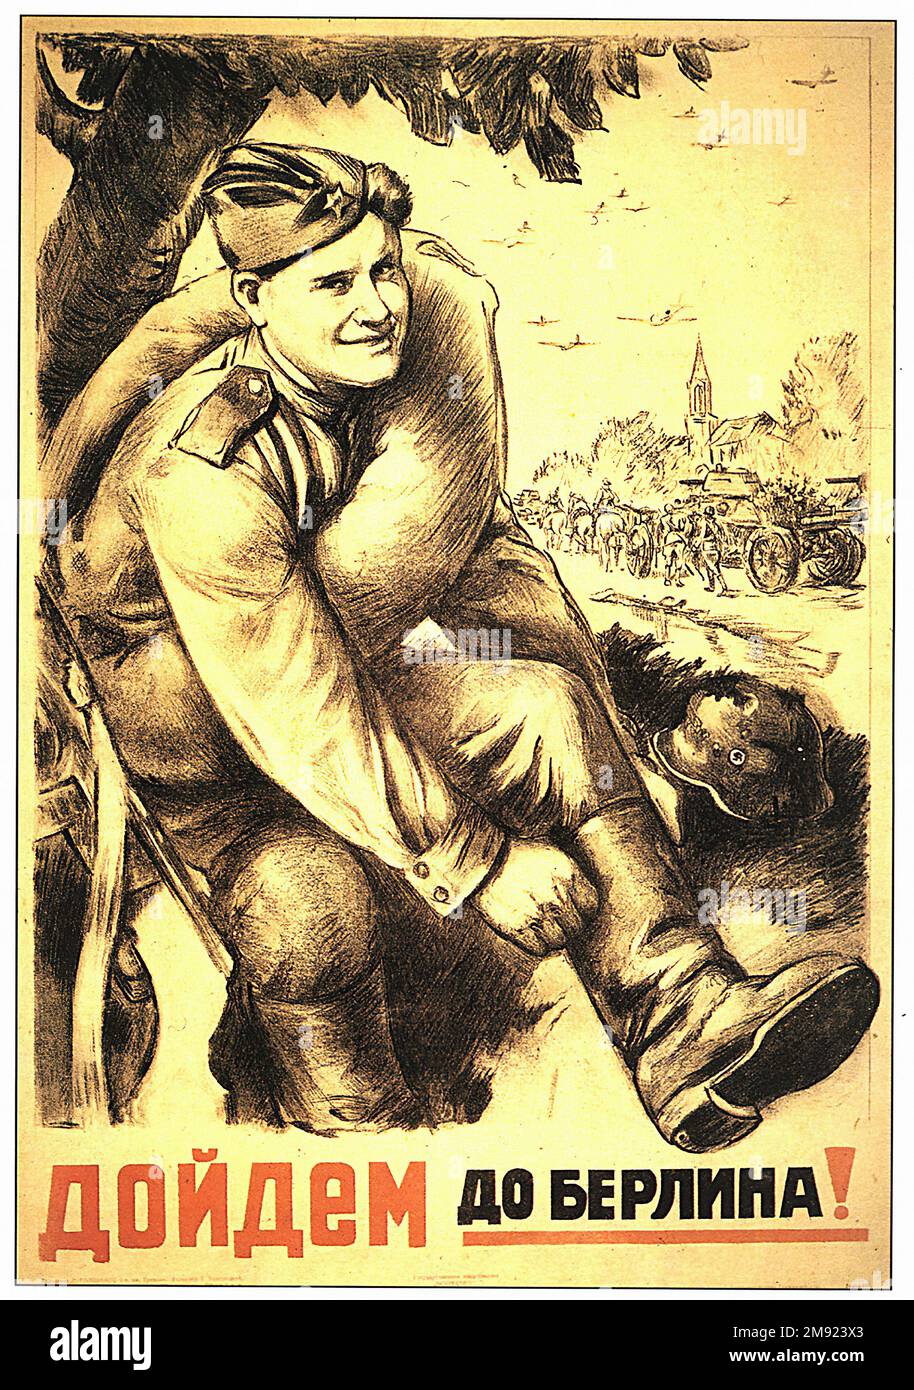 March To Berlin (Translated from Russian) - Vintage USSR soviet propaganda poster Stock Photo